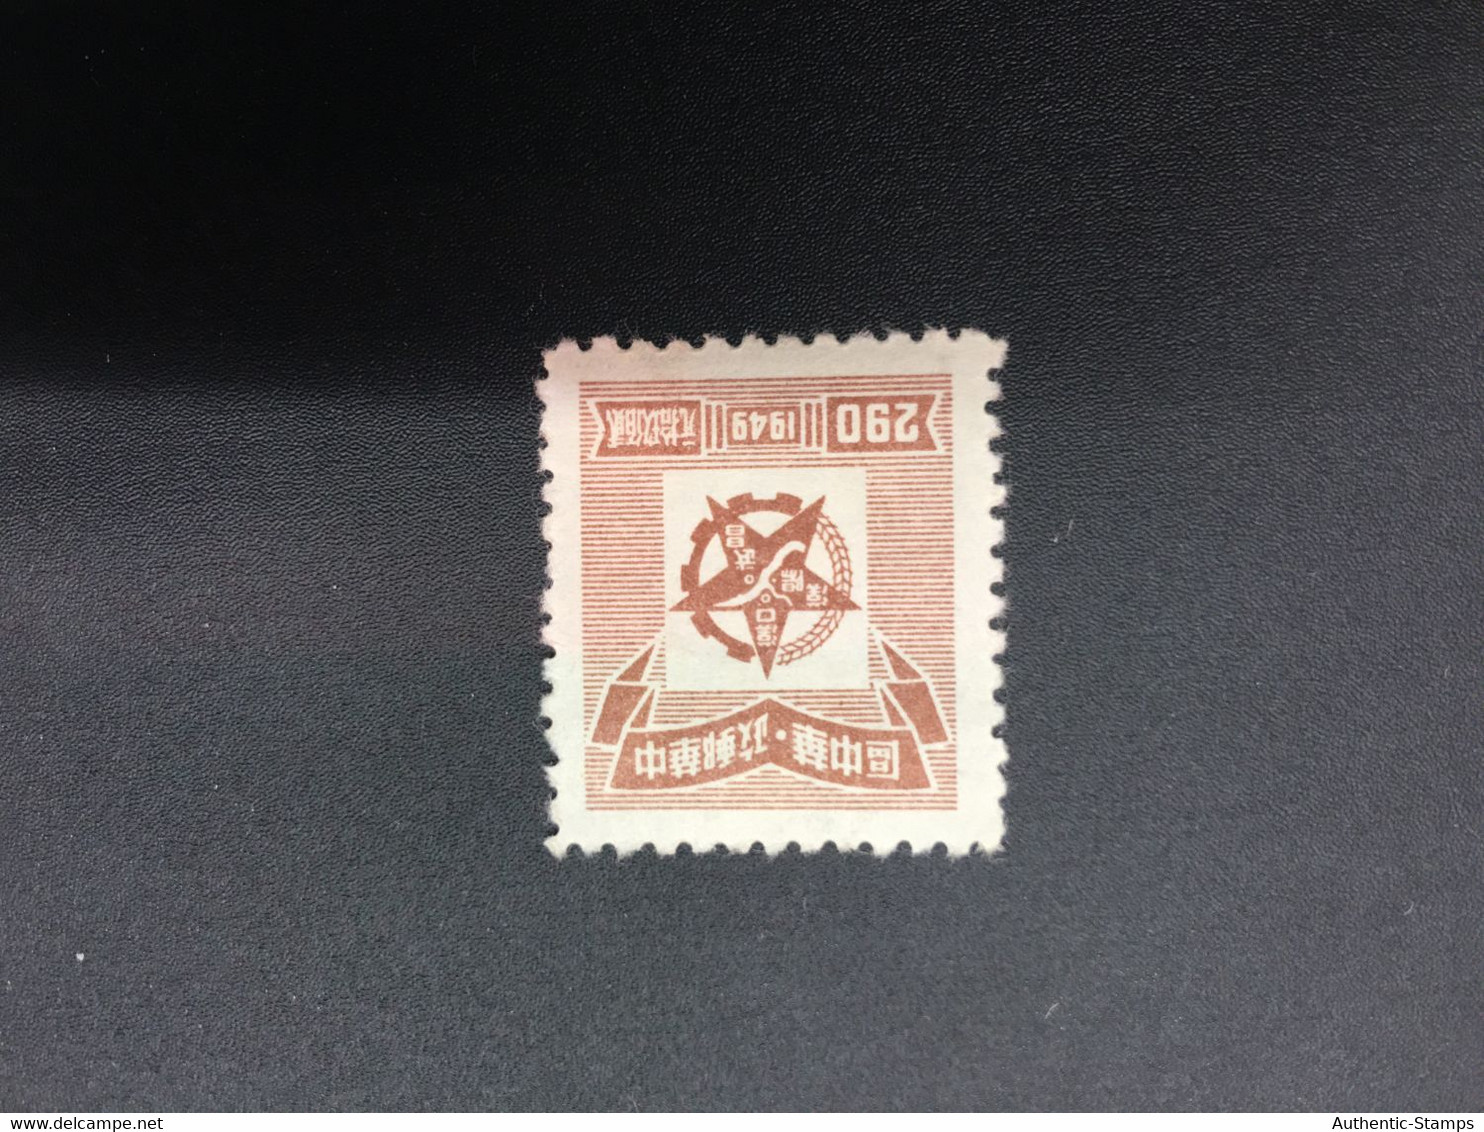 CHINA STAMP,  Unused, TIMBRO, STEMPEL,  CINA, CHINE, LIST 7818 - Cina Centrale 1948-49